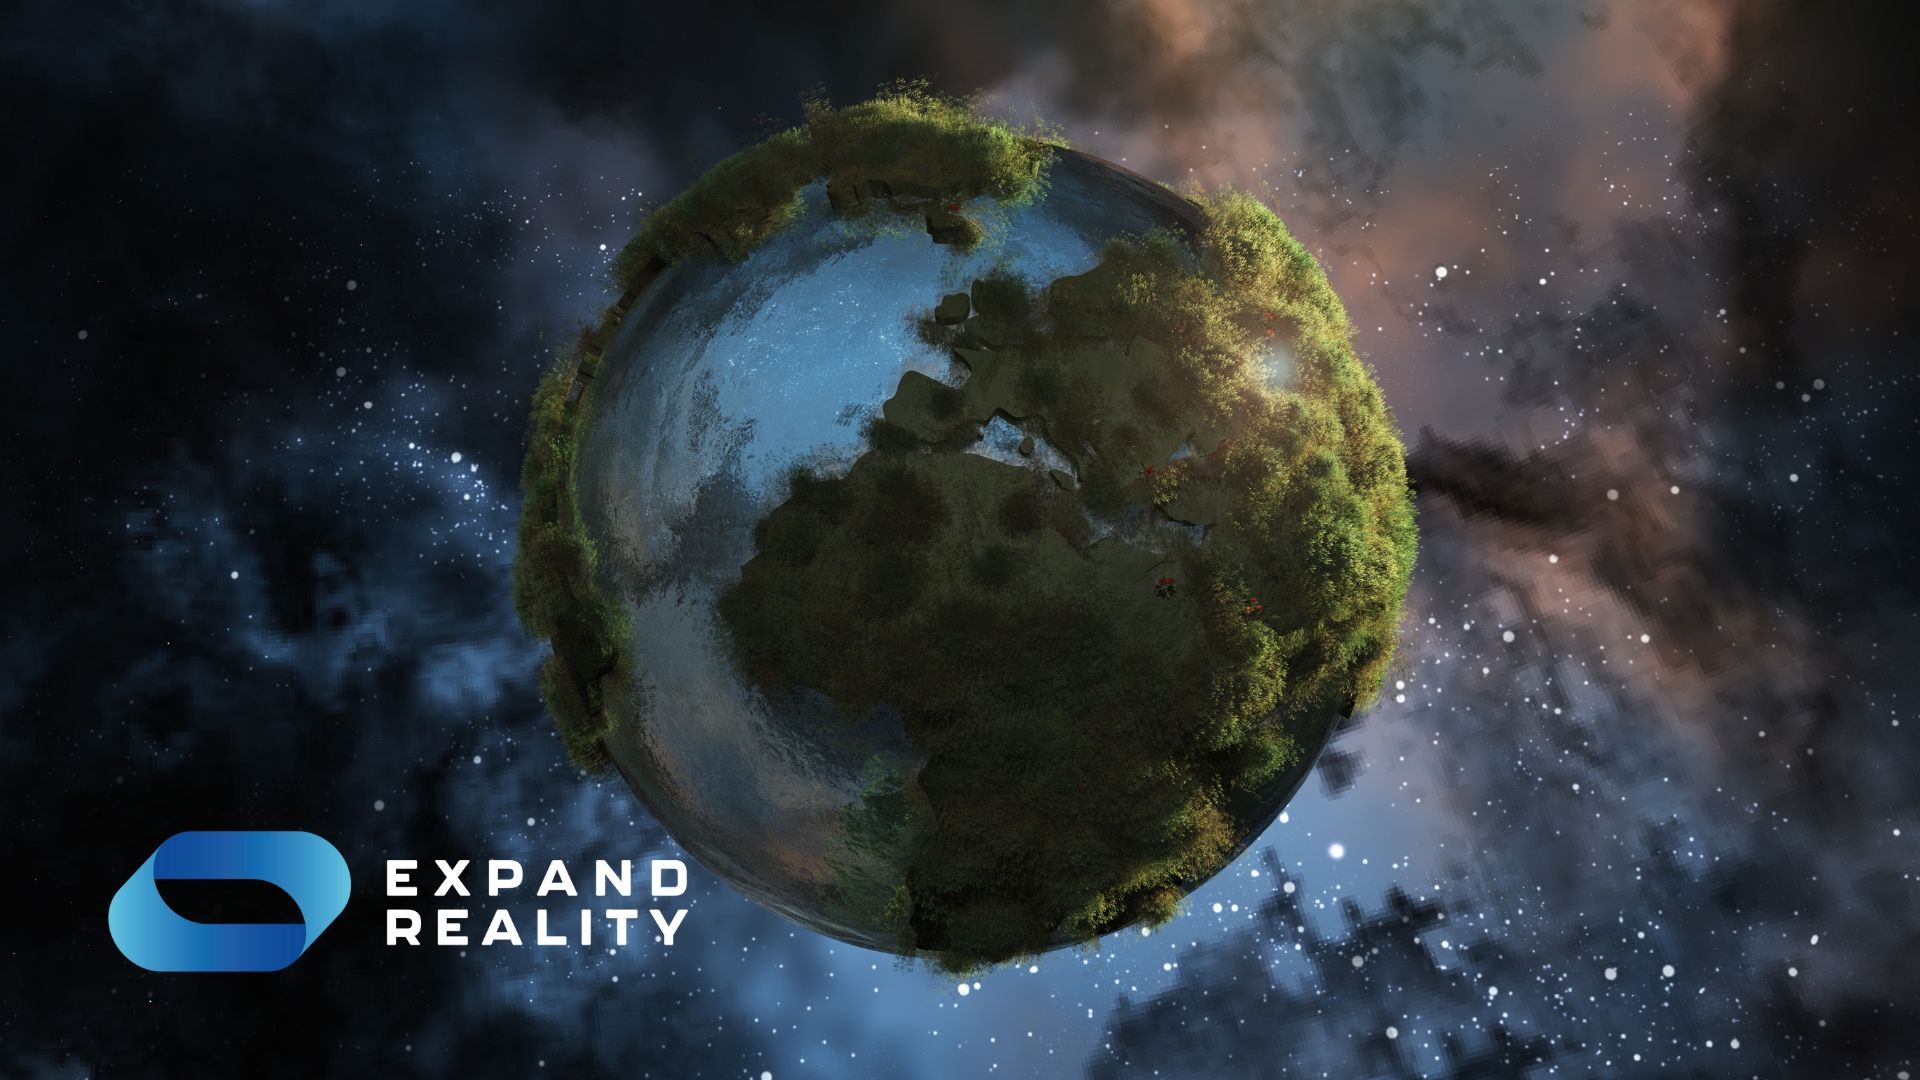 XR is a useful tool for businesses – and so much more besides. Explore some ways in which this powerful technology is saving our vulnerable planet.